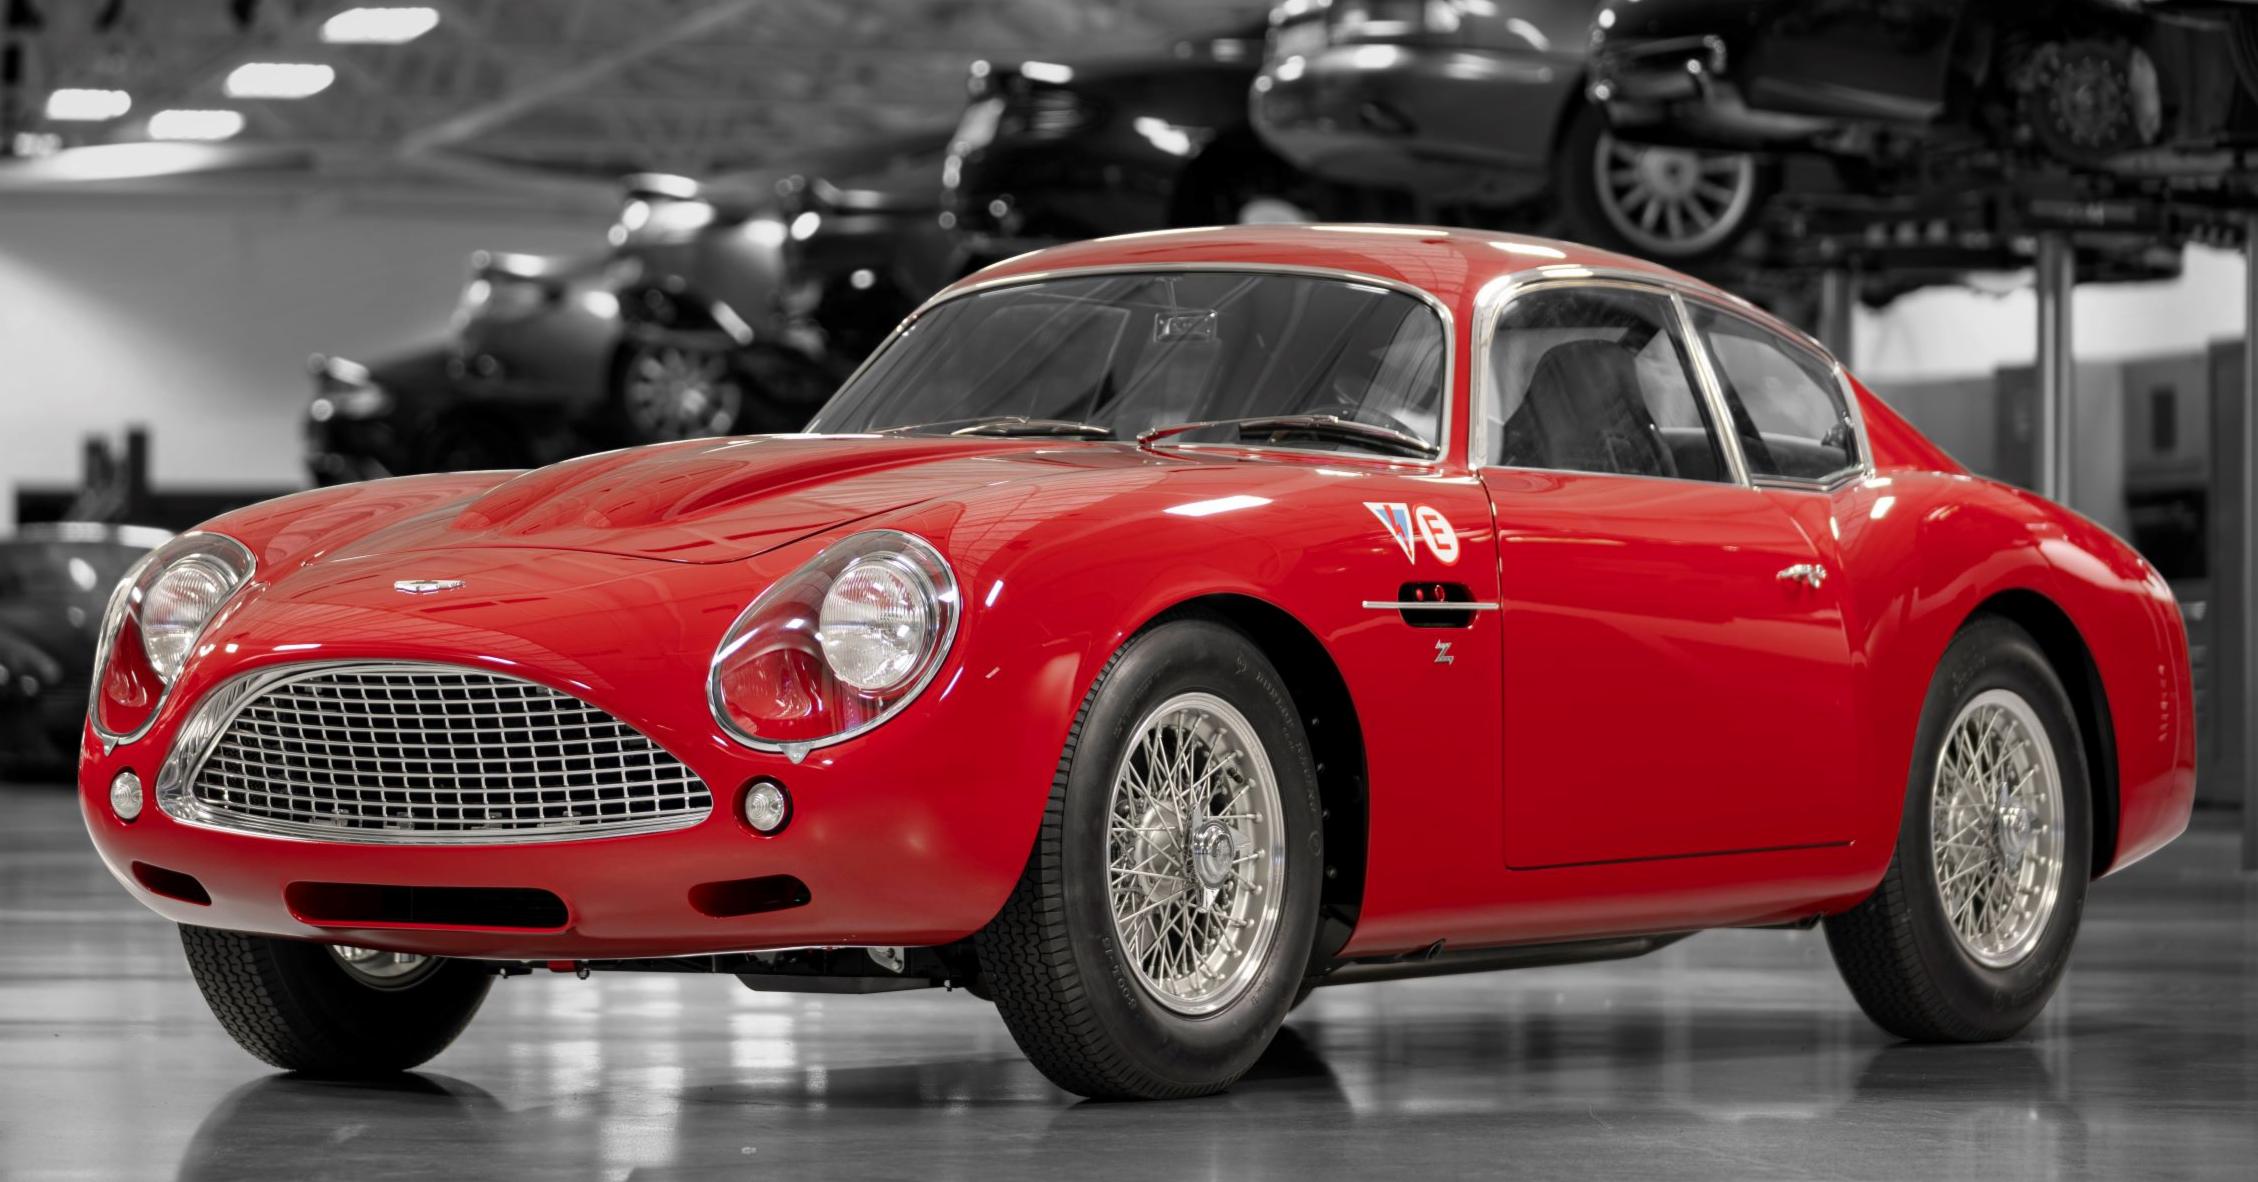 The Most Expensive New Aston Martin Is a Revamp of a Classic Race 